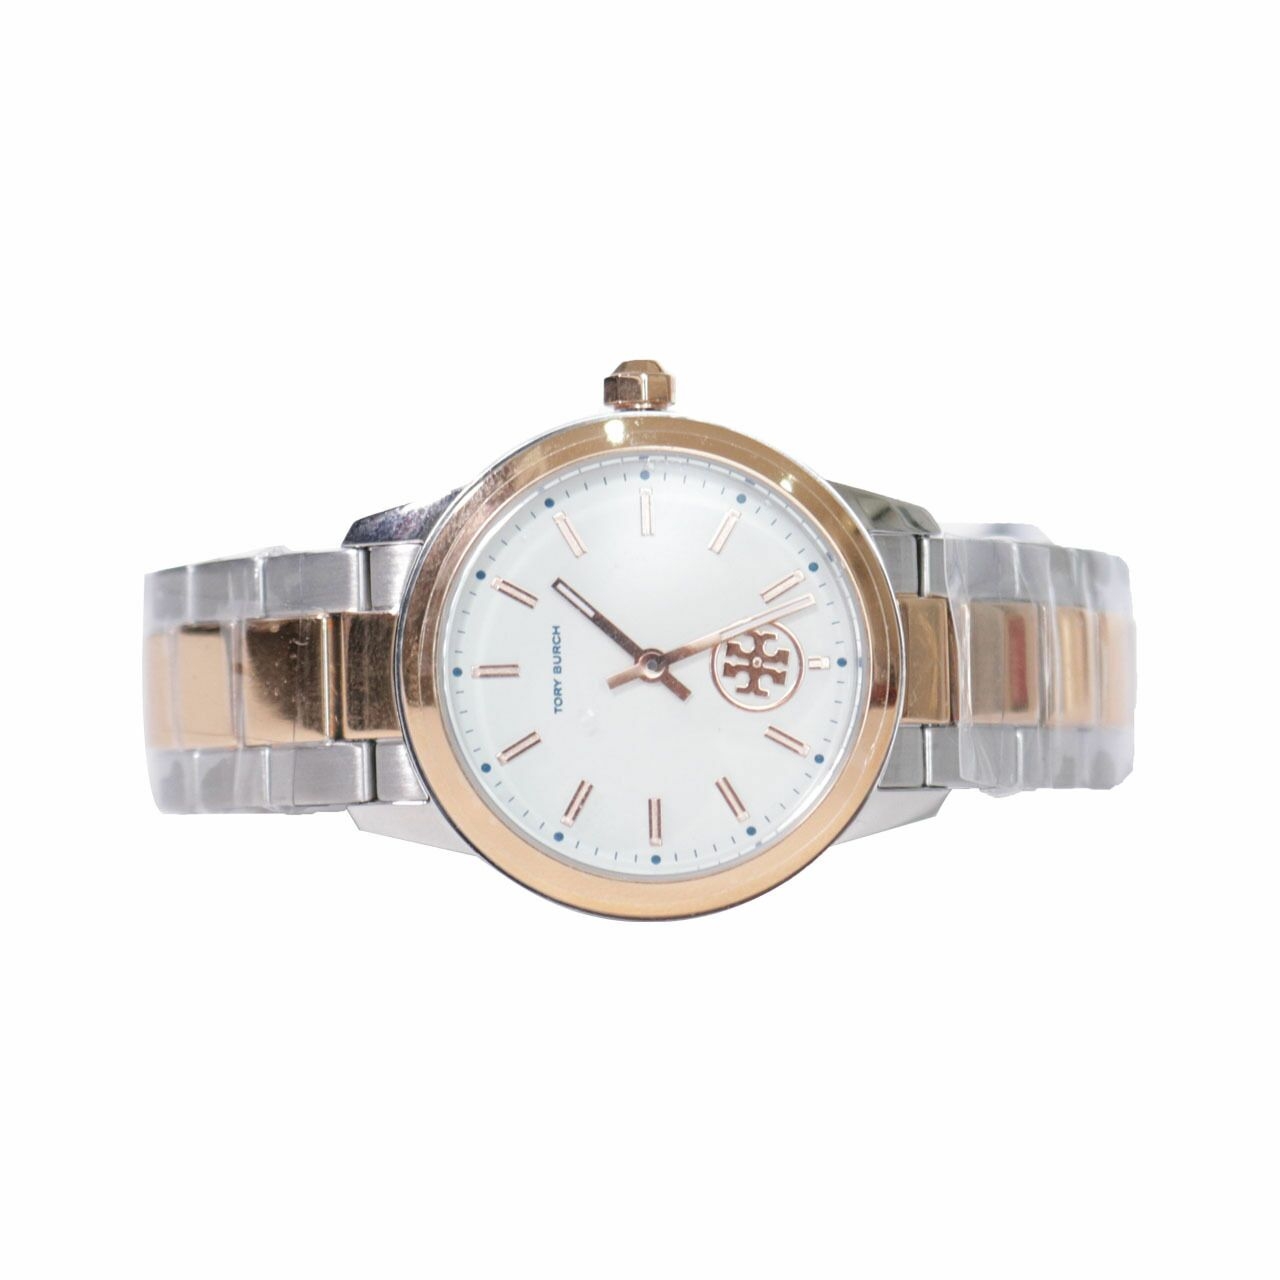 Tory Burch Collins Watch Two-Tone Rose Gold Stainless Steel Ivory 32mm Wrist Watch